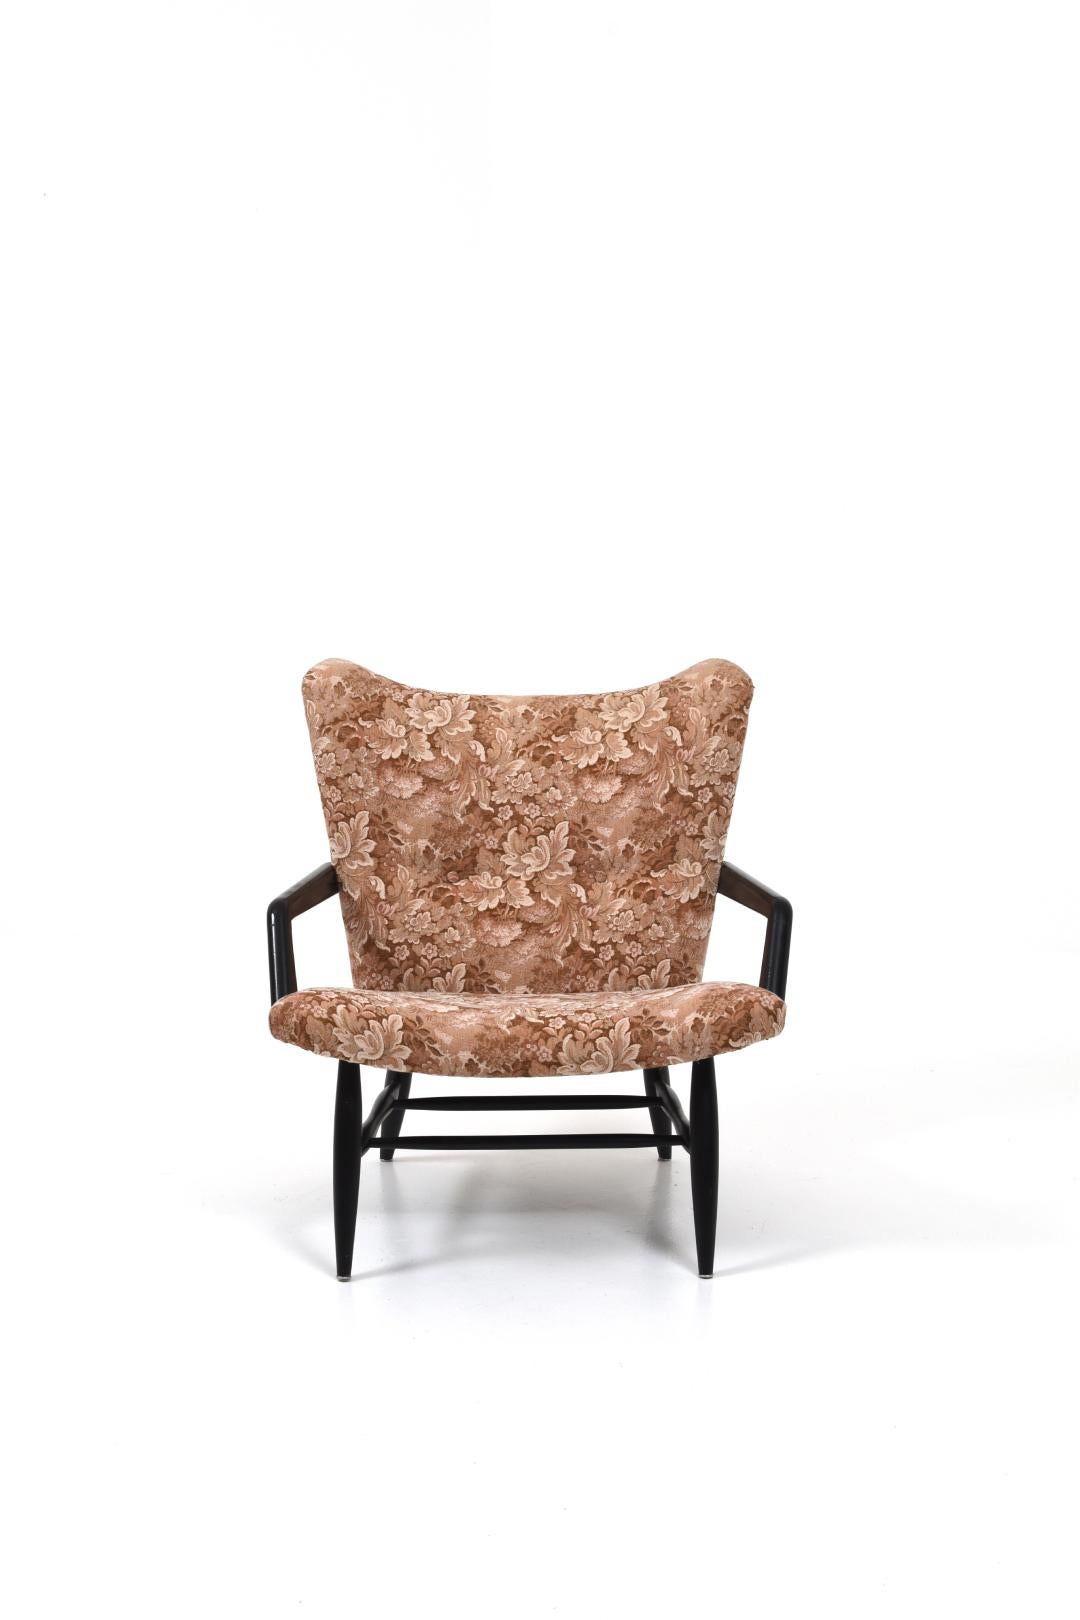 An unusual armchair designed by Svante Skogh.
The armchair has a black-painted frame and original fabric. There is patina on the fabric, but is fully functional.